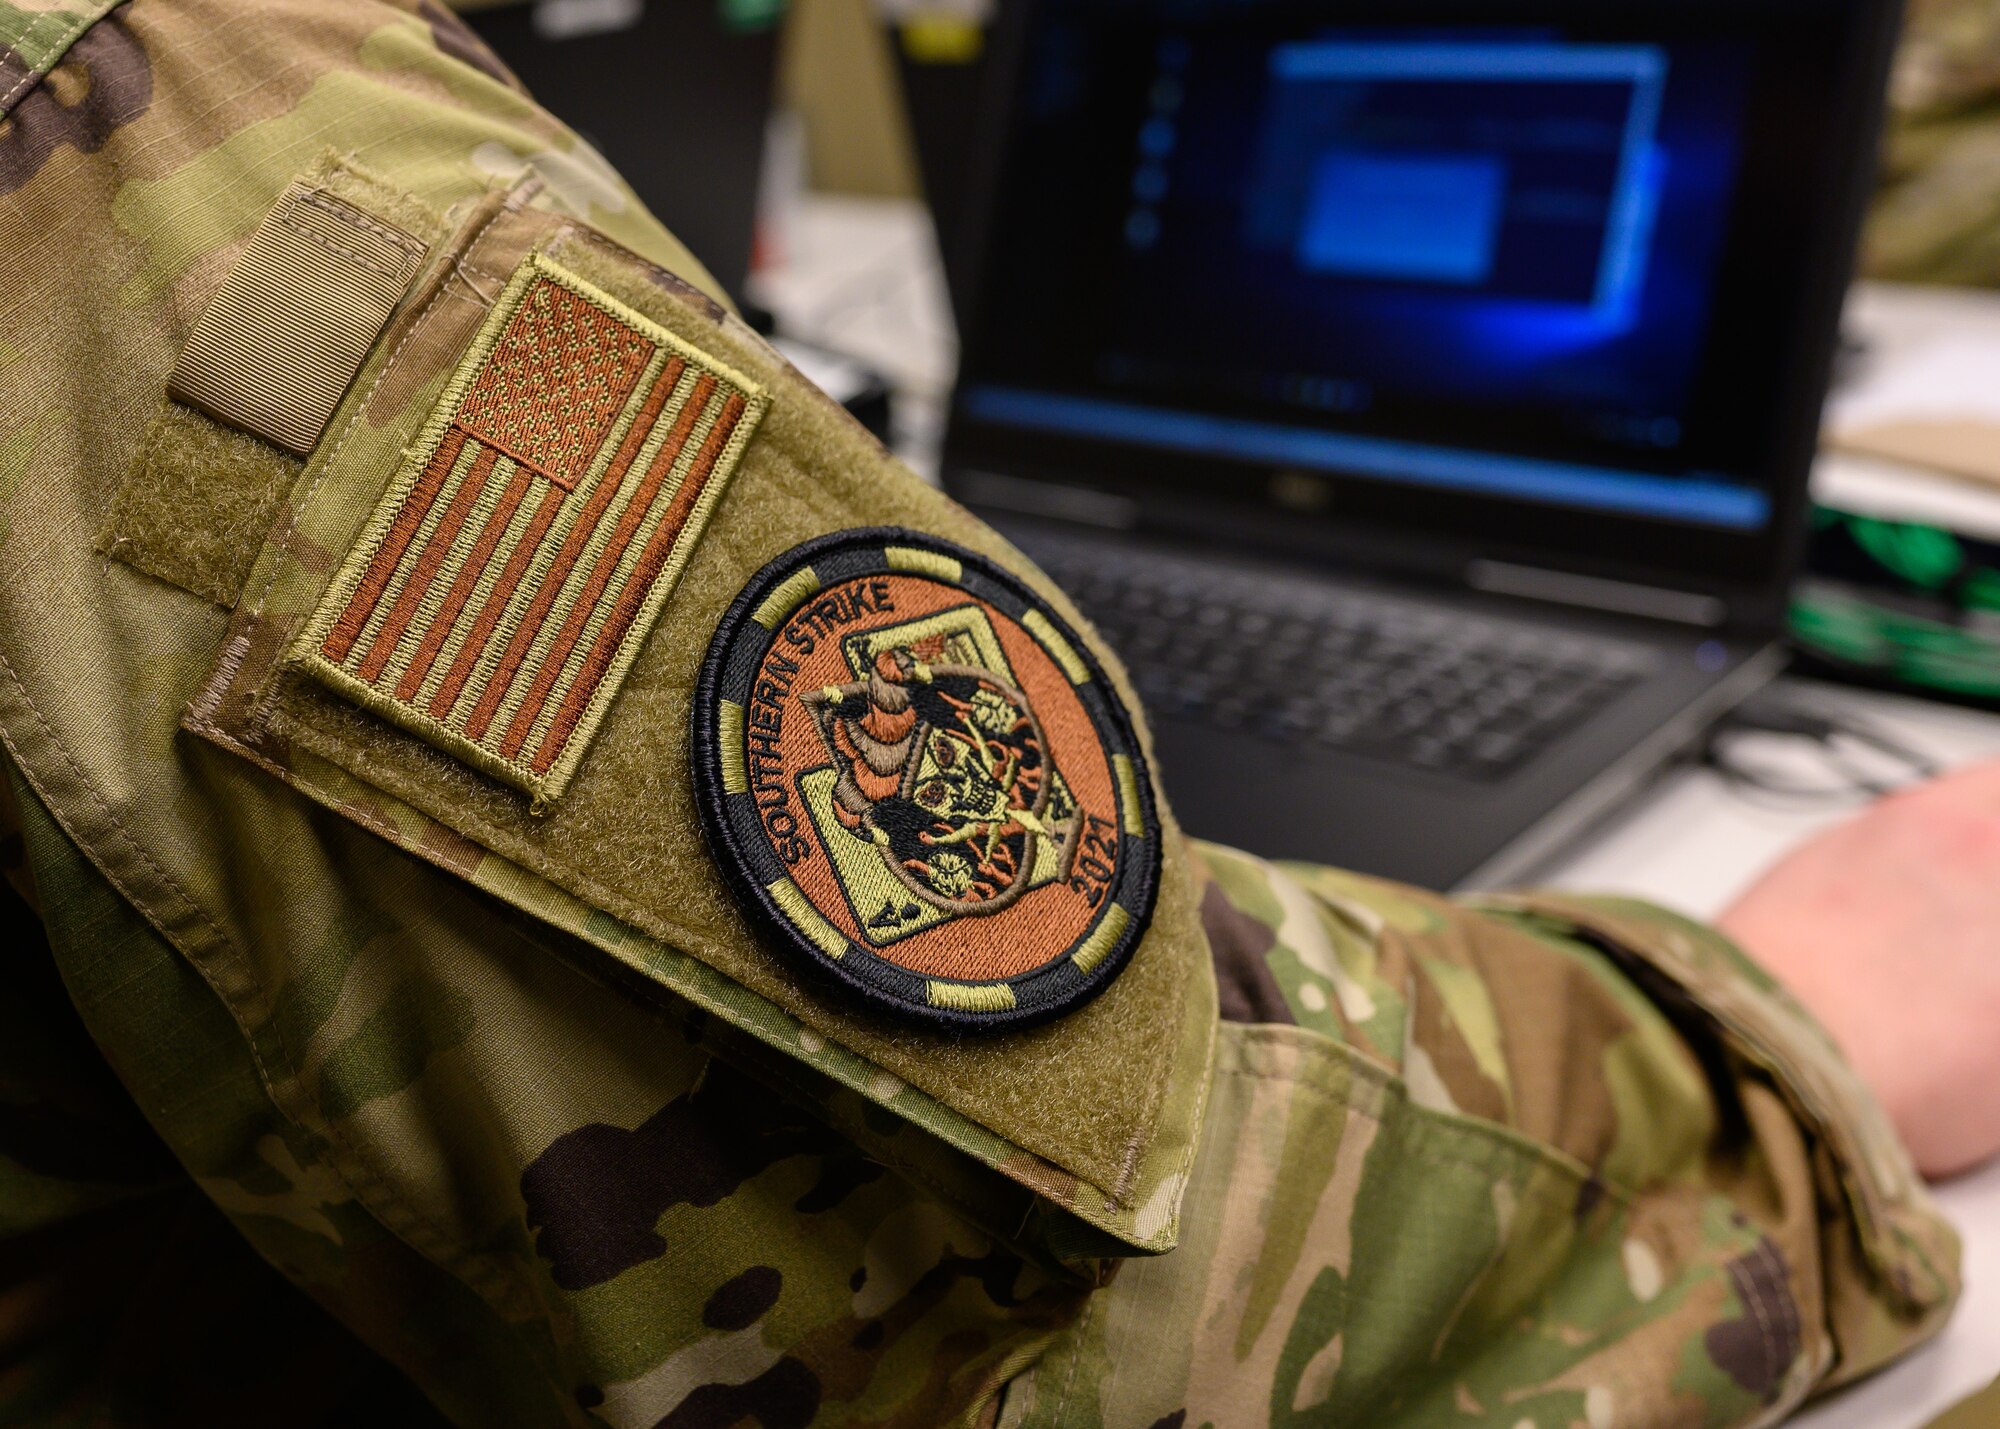 U.S. Air Force Staff Sgt. James Abeyta, a cyber warfare operator with the 275th Cyberspace Operations Squadron, Maryland Air National Guard, wears a Southern Strike 21 exercise patch while working on a computer April 21, 2021, at the Gulfport Combat Readiness Training Center, Gulfport, Mississippi.